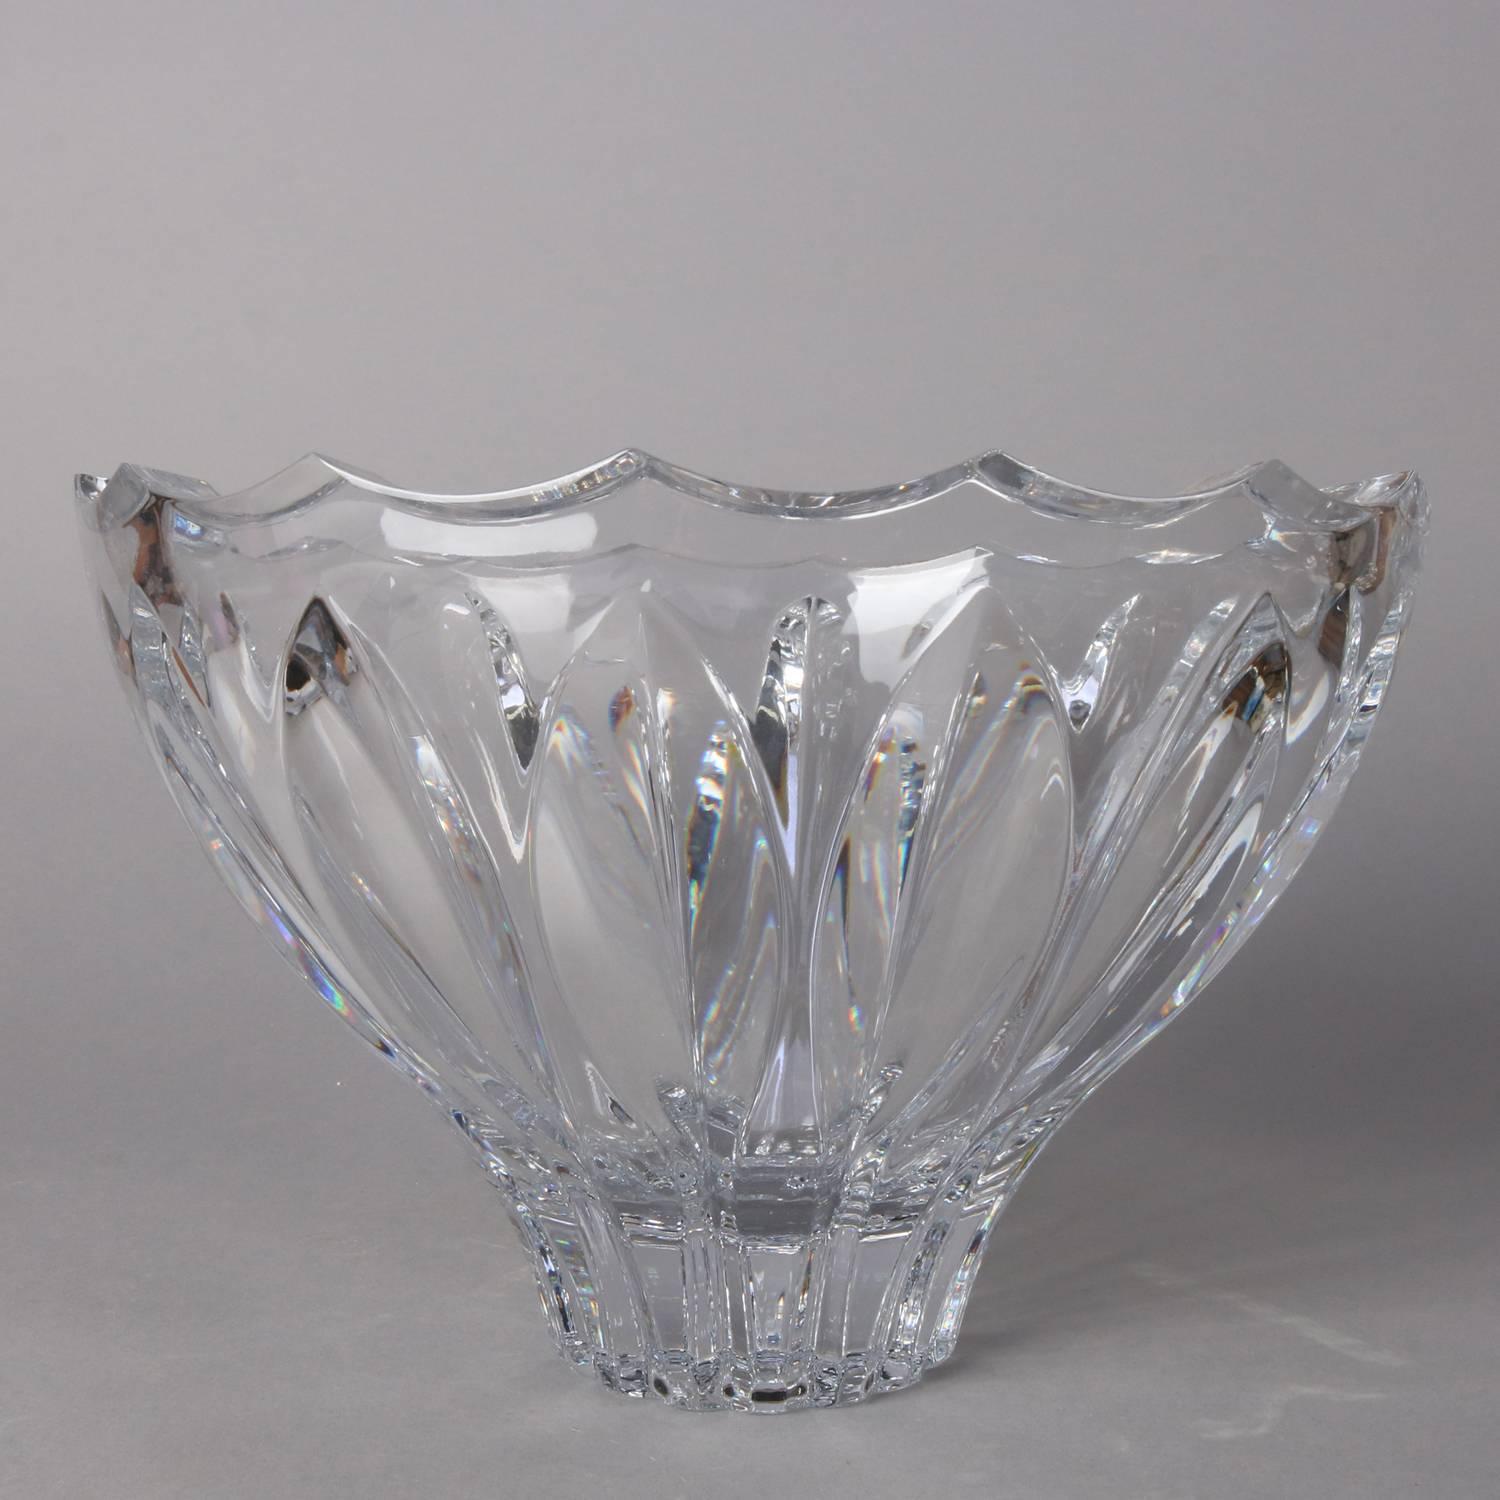 Contemporary Baccarat School heavy crystal vase features tulip form with stylized leaf pattern and scalloped rim, 20th century

Measures: 7